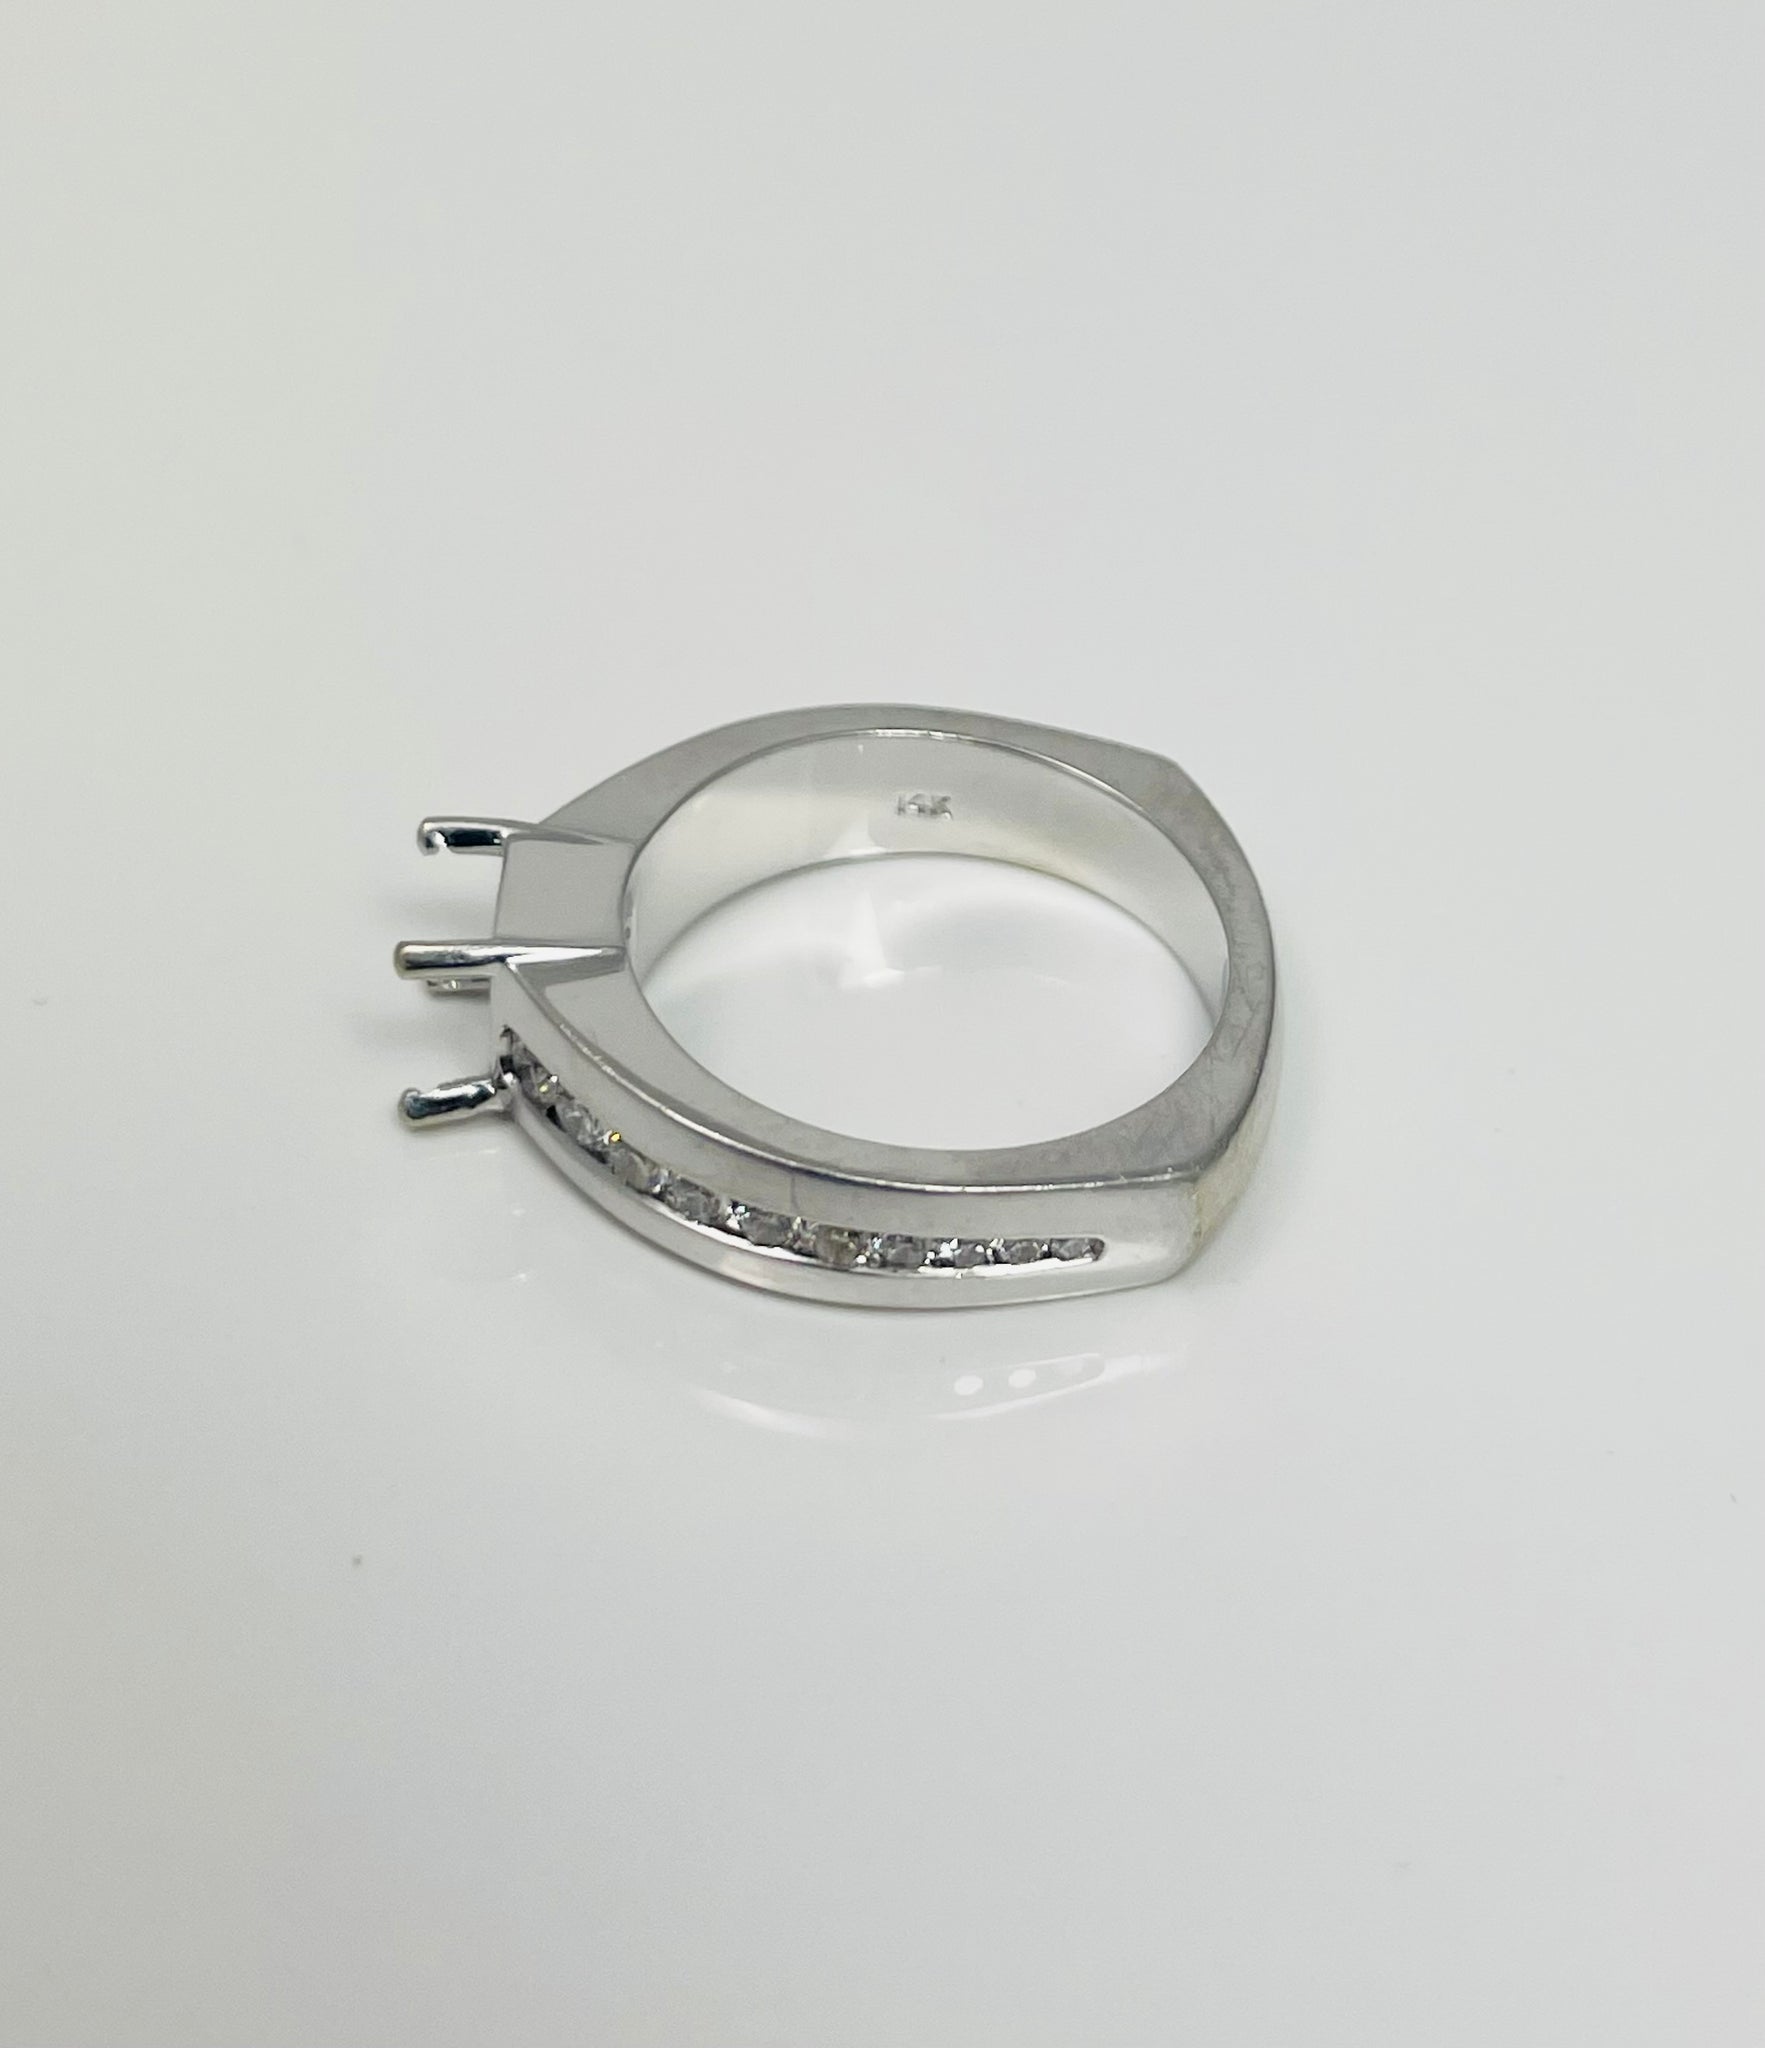 Well Made 14k White Gold Natural Diamond Ring Mount